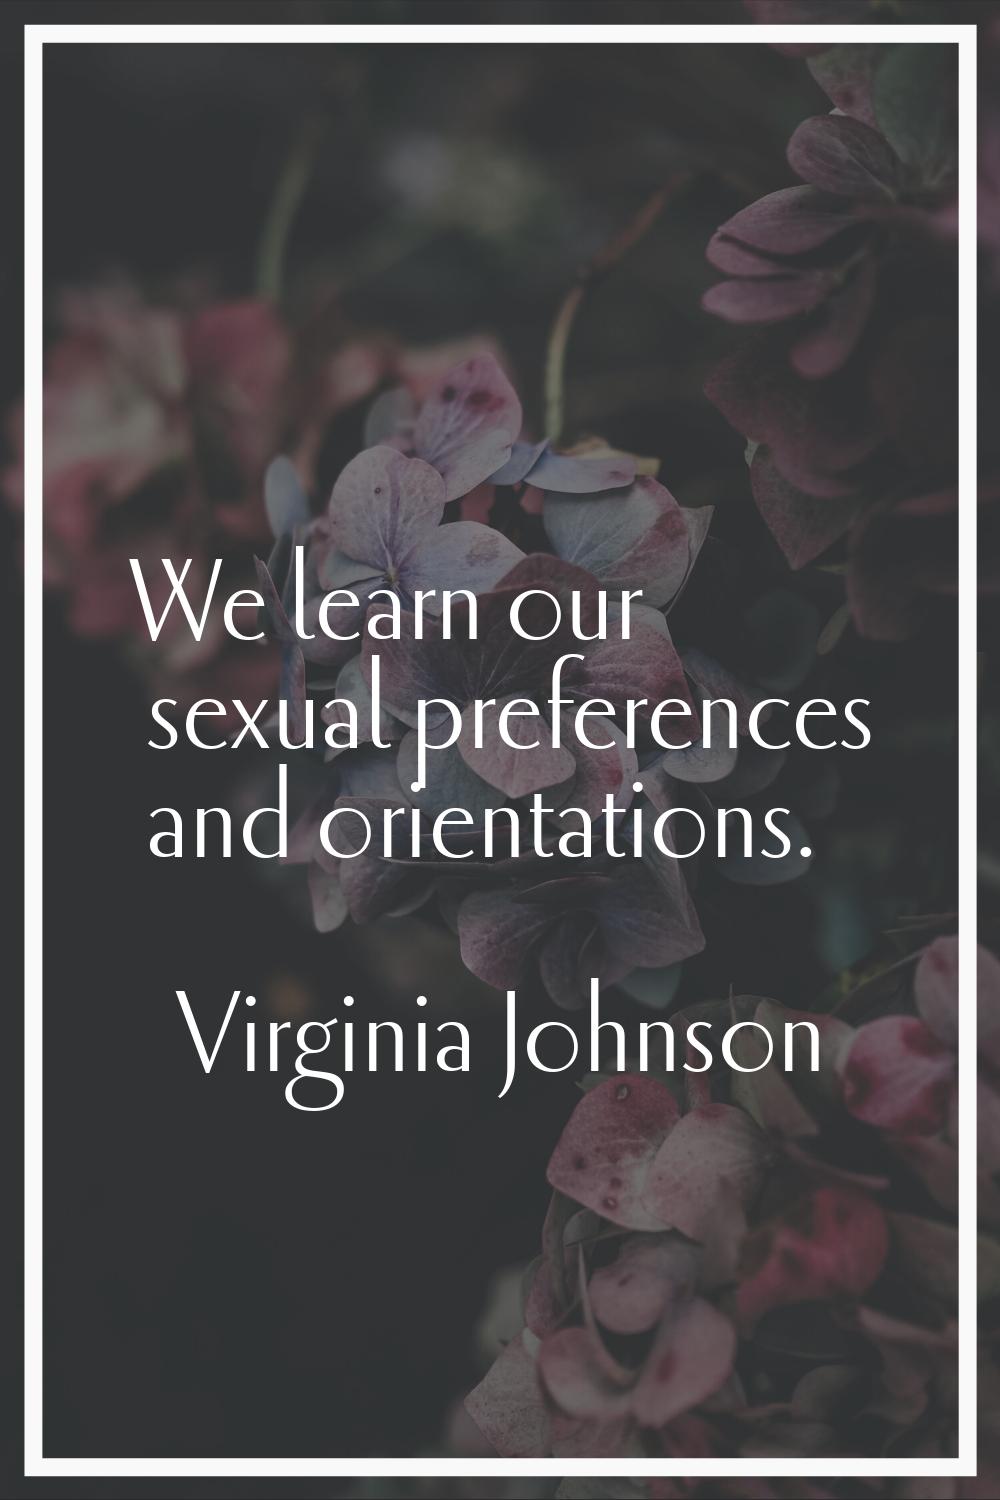 We learn our sexual preferences and orientations.